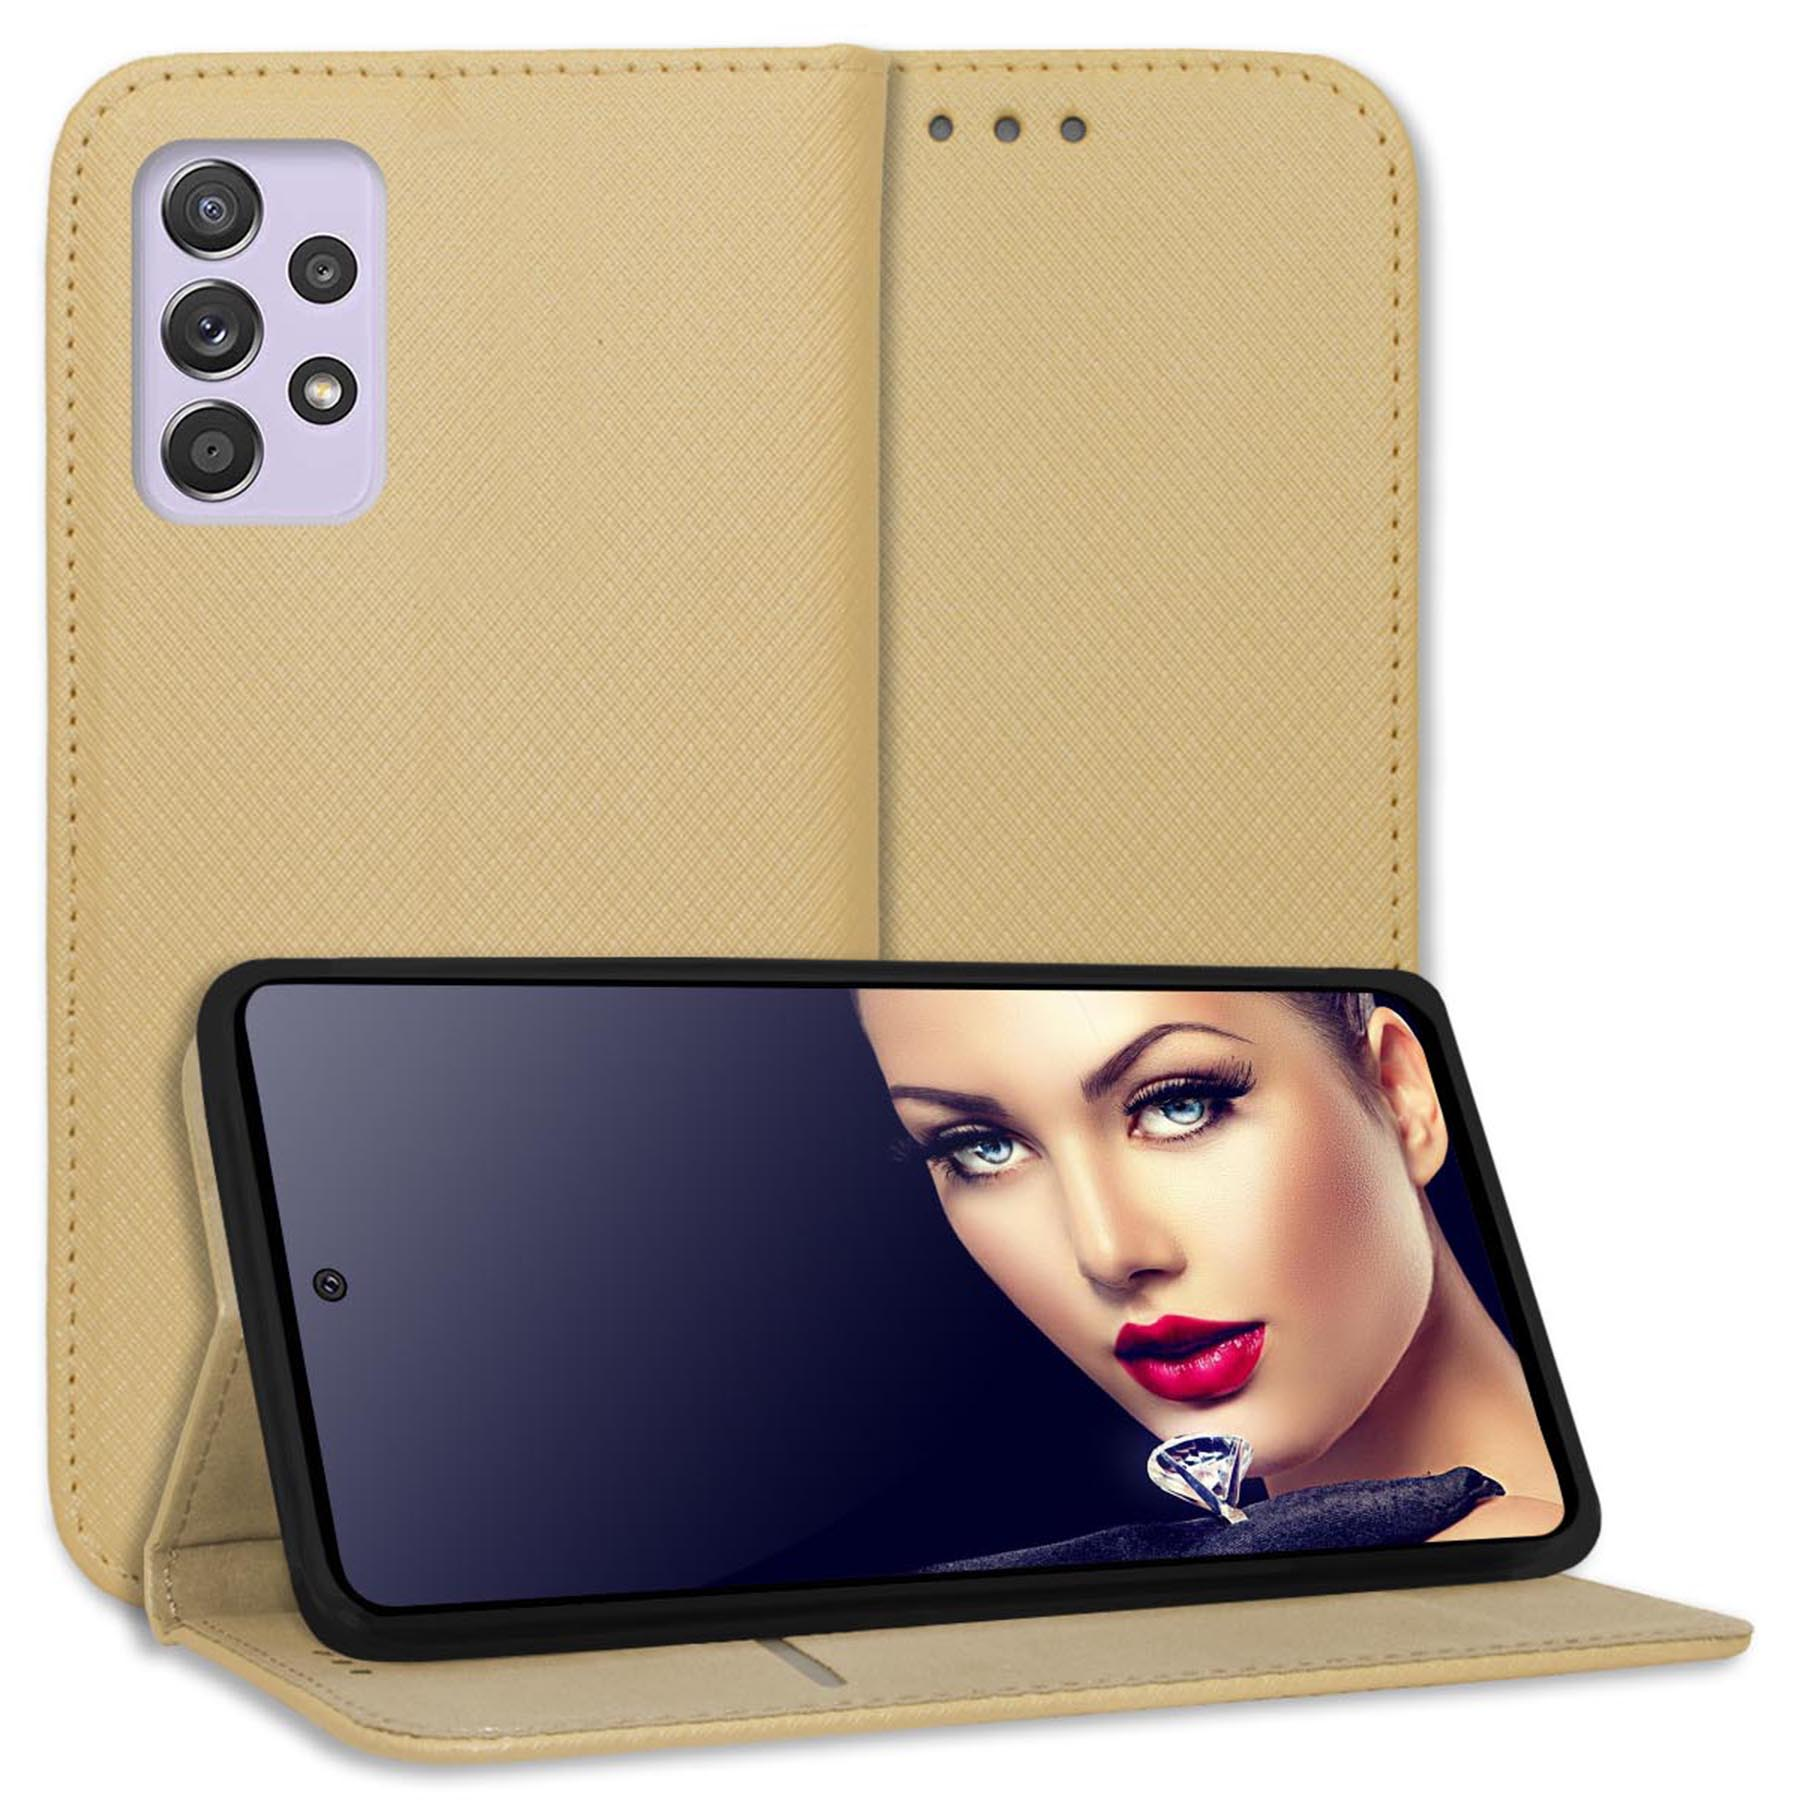 MTB MORE ENERGY 5G, A52 A52S Bookcover, 4G, Galaxy A52 Gold Samsung, Klapphülle, 5G, Magnet Smart